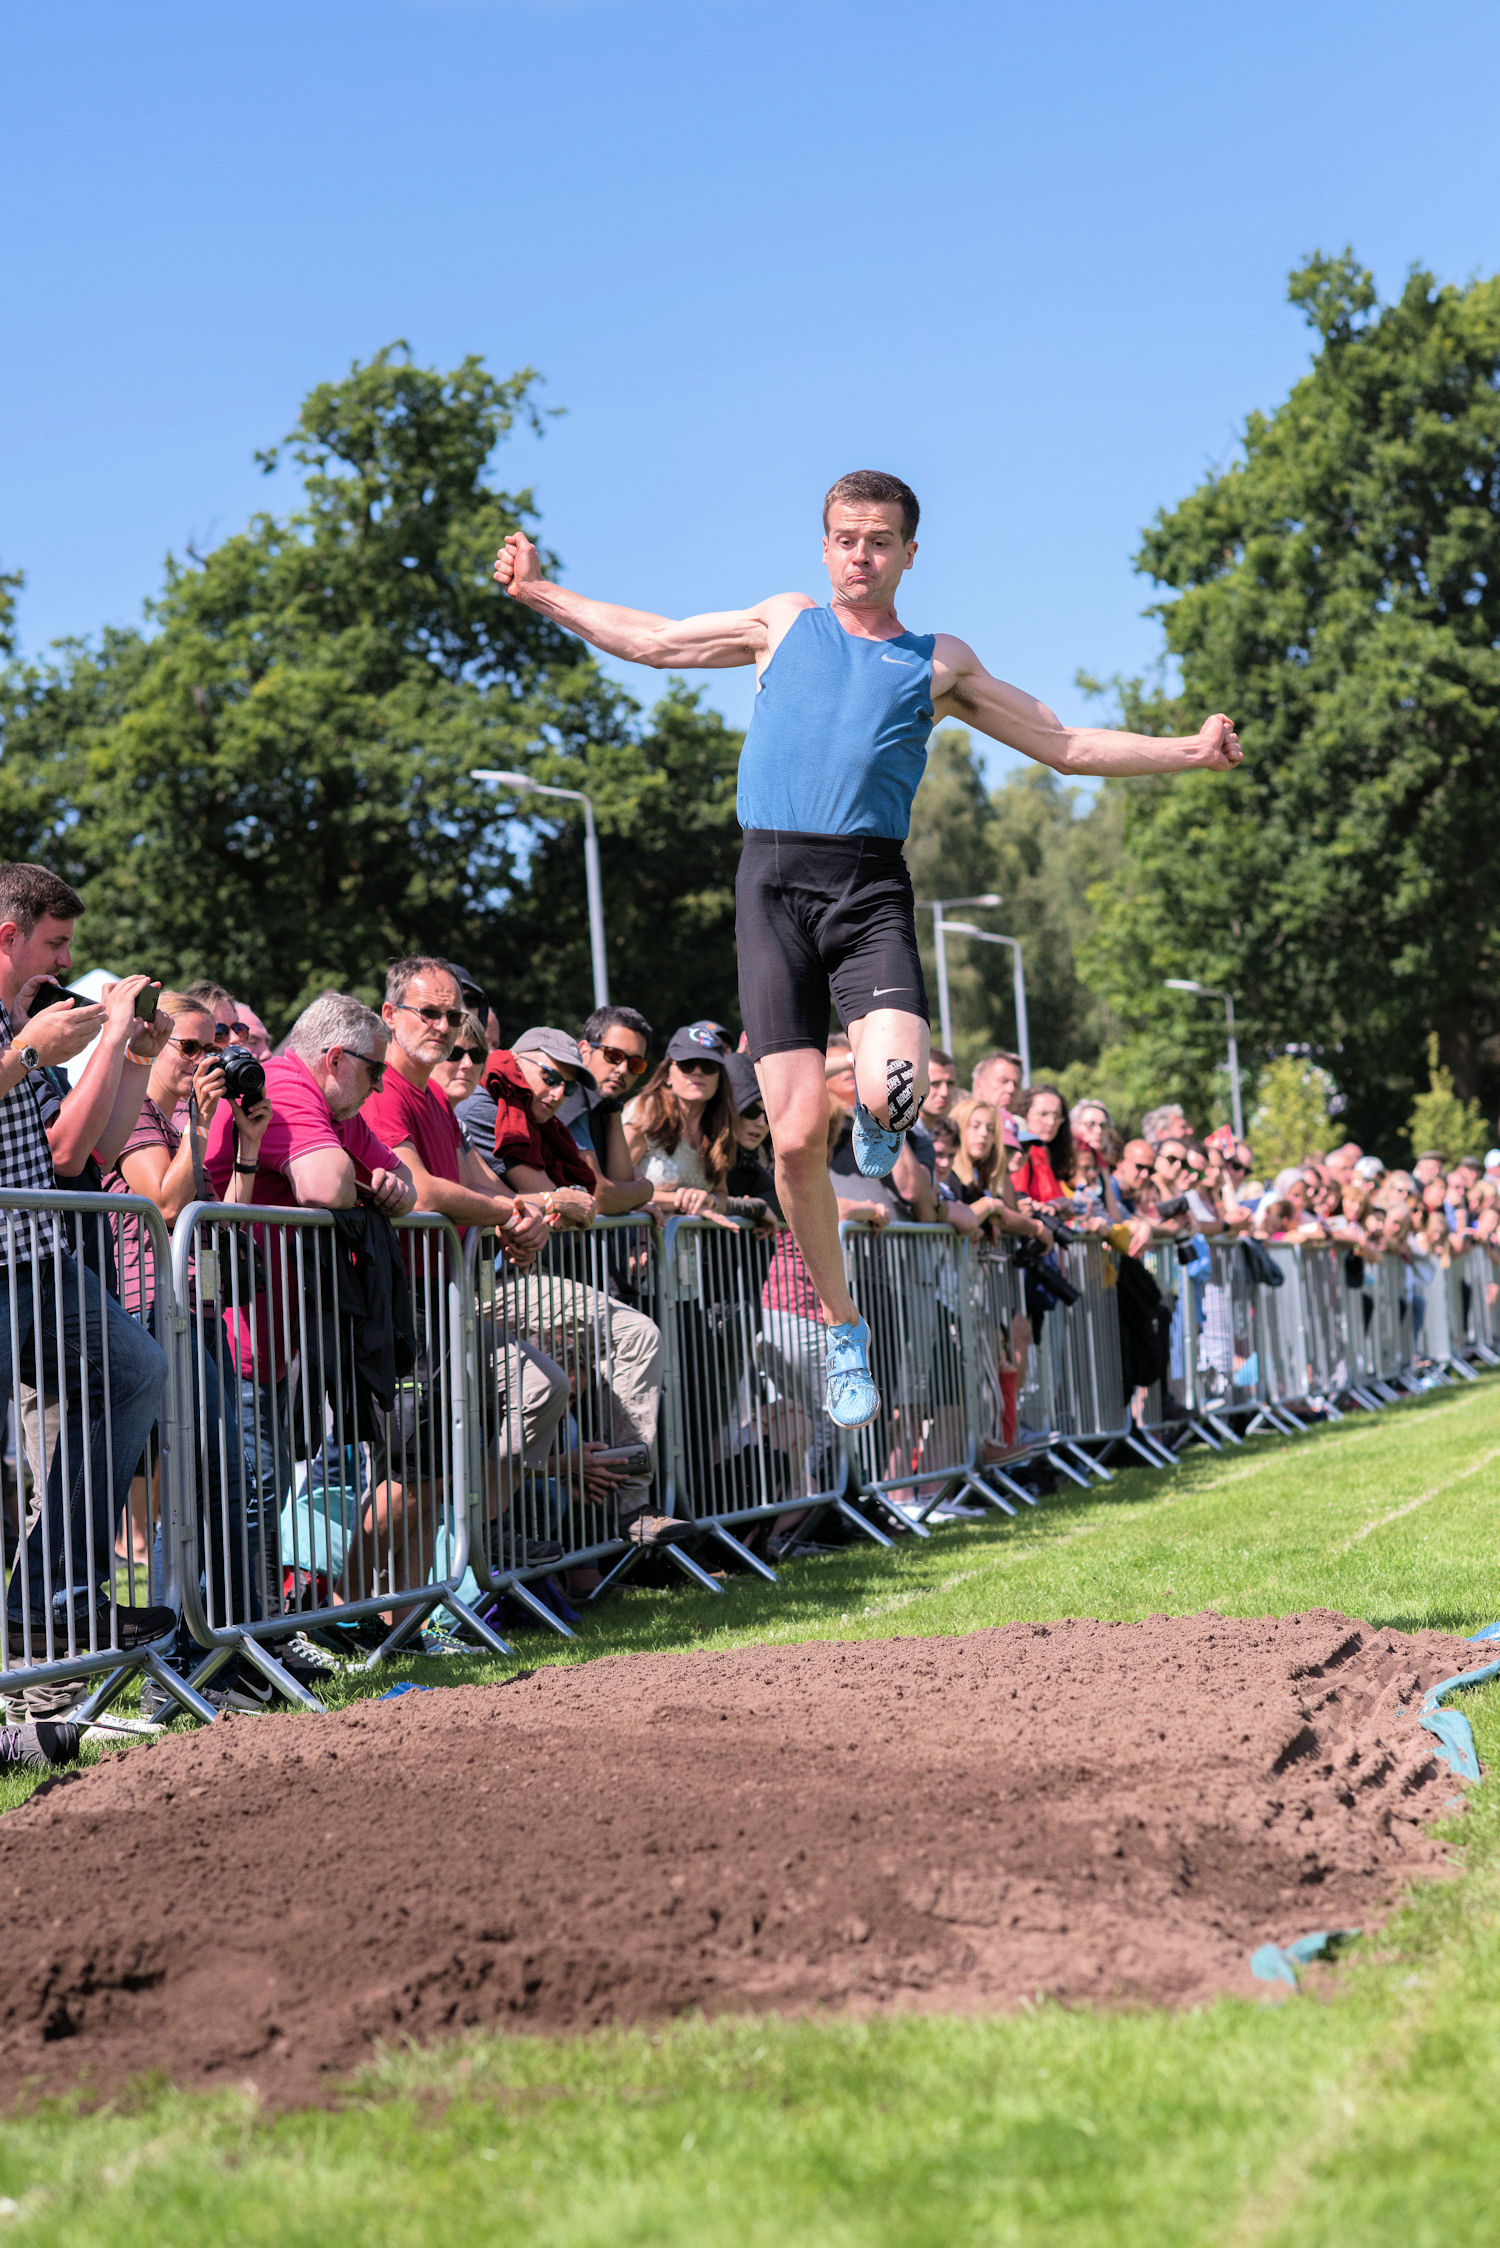 image of Highland Games long jumper in mid air